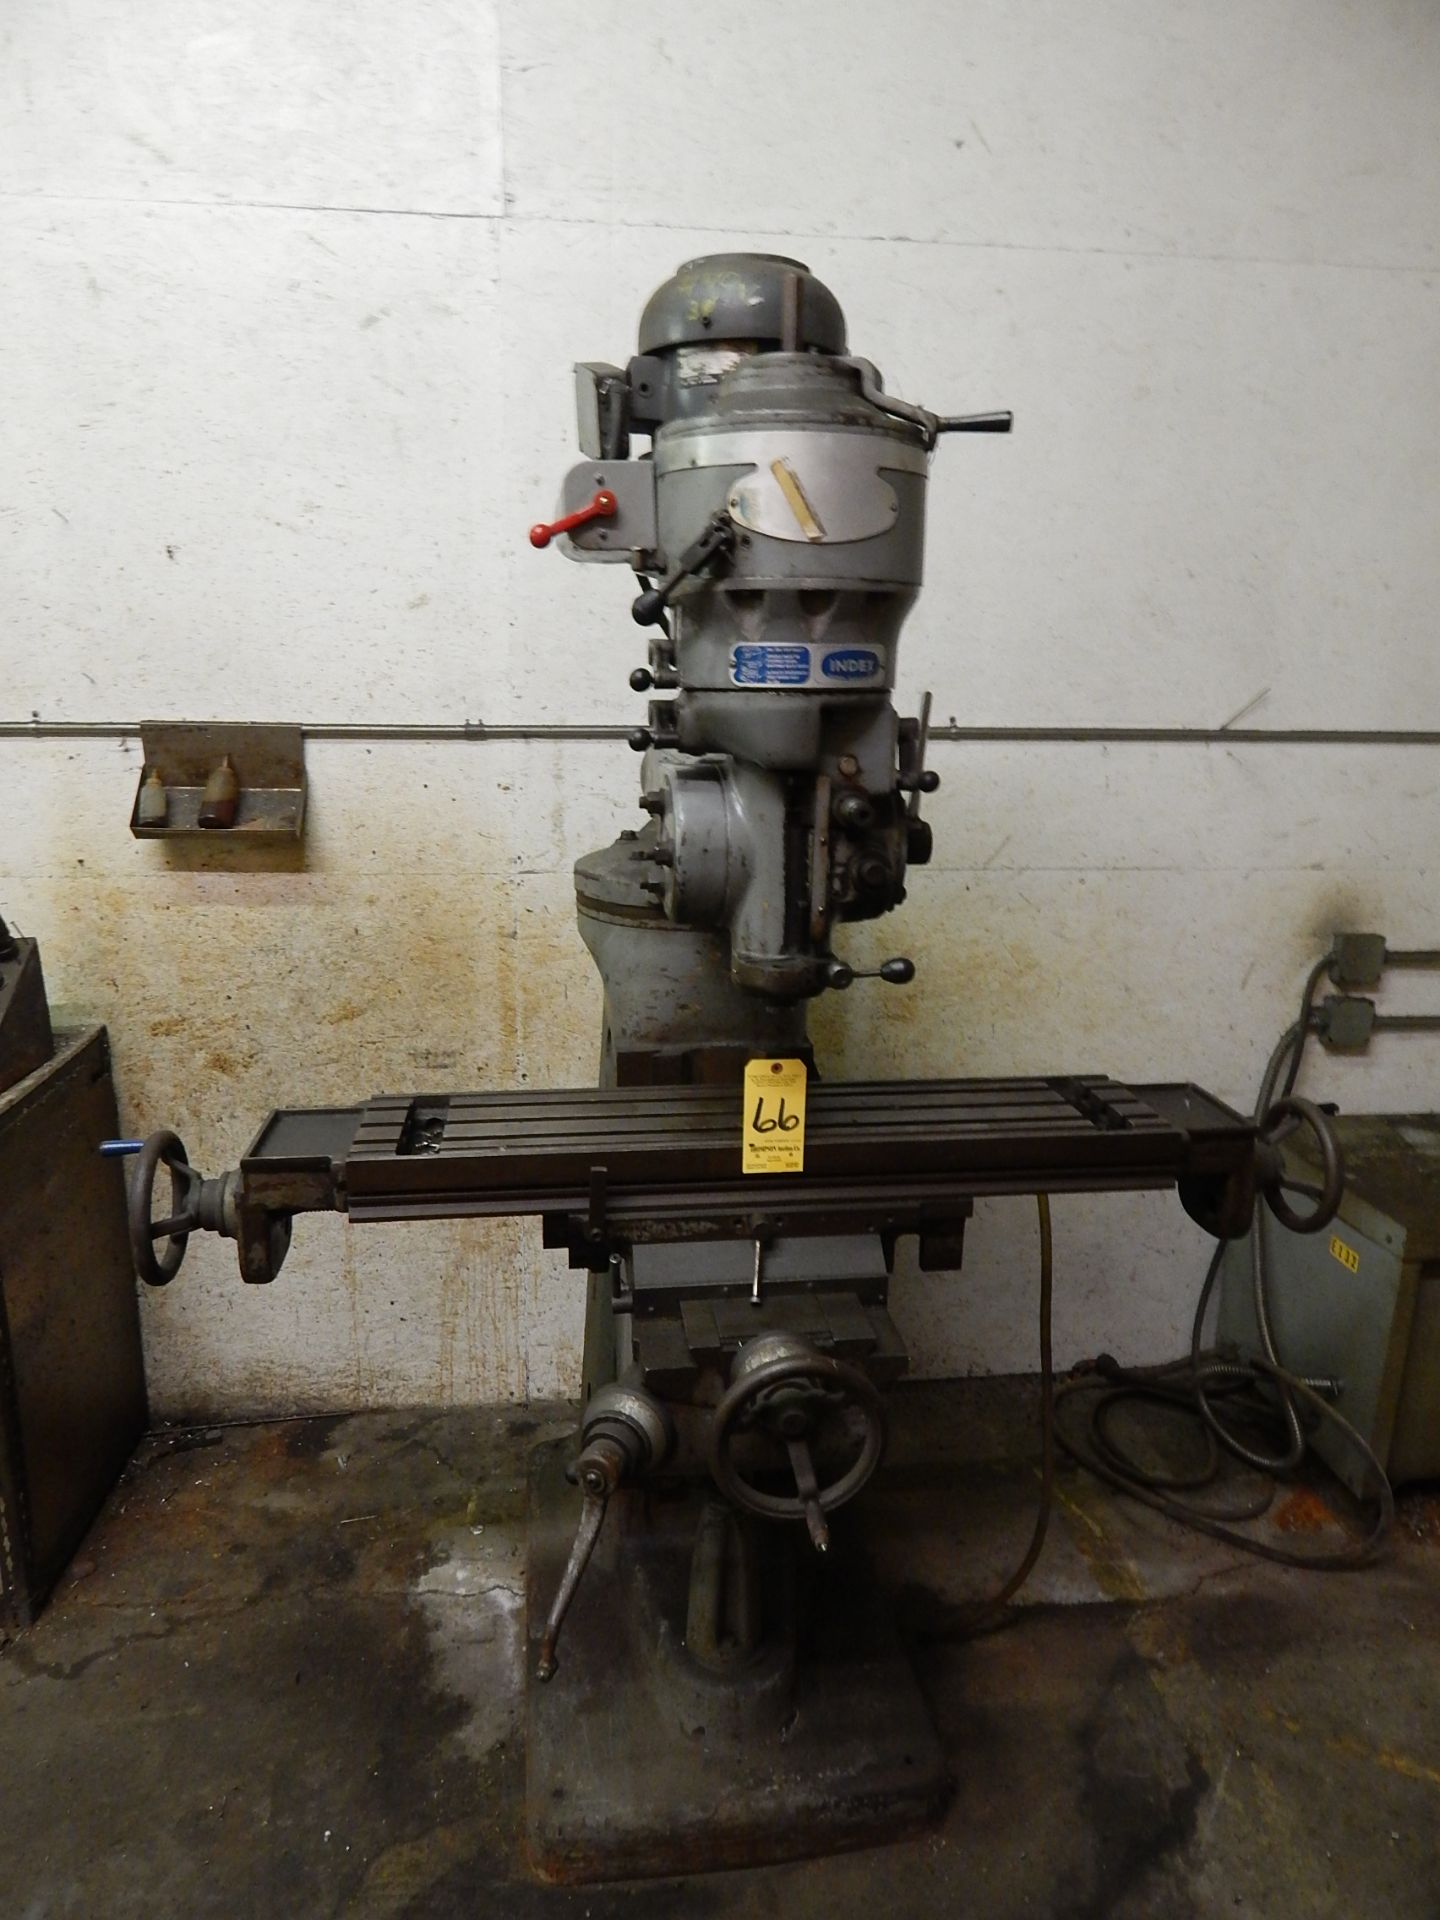 Index Model 747 Vertical Mill, s/n 15555, Loading Fee $150.00 - Image 3 of 4